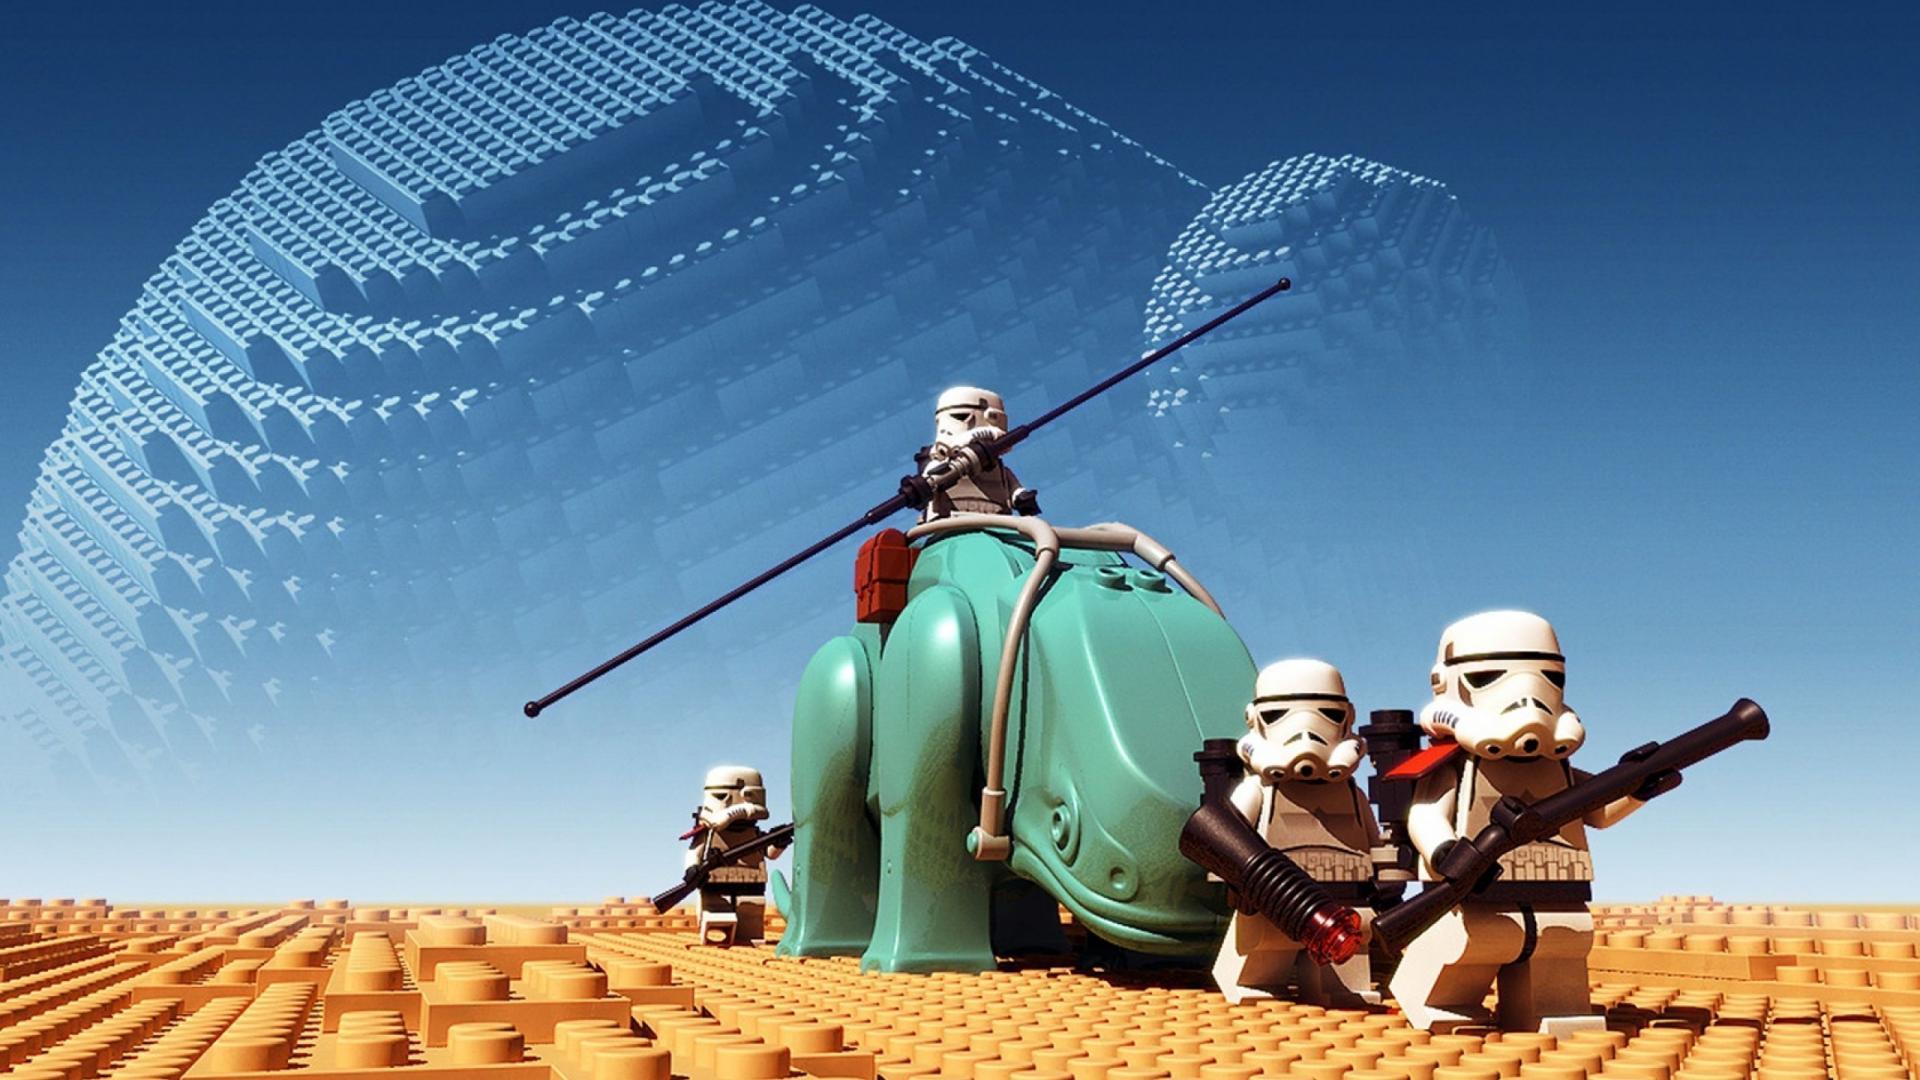 Star Wars Lego Wallpapers - Wallpaper Cave